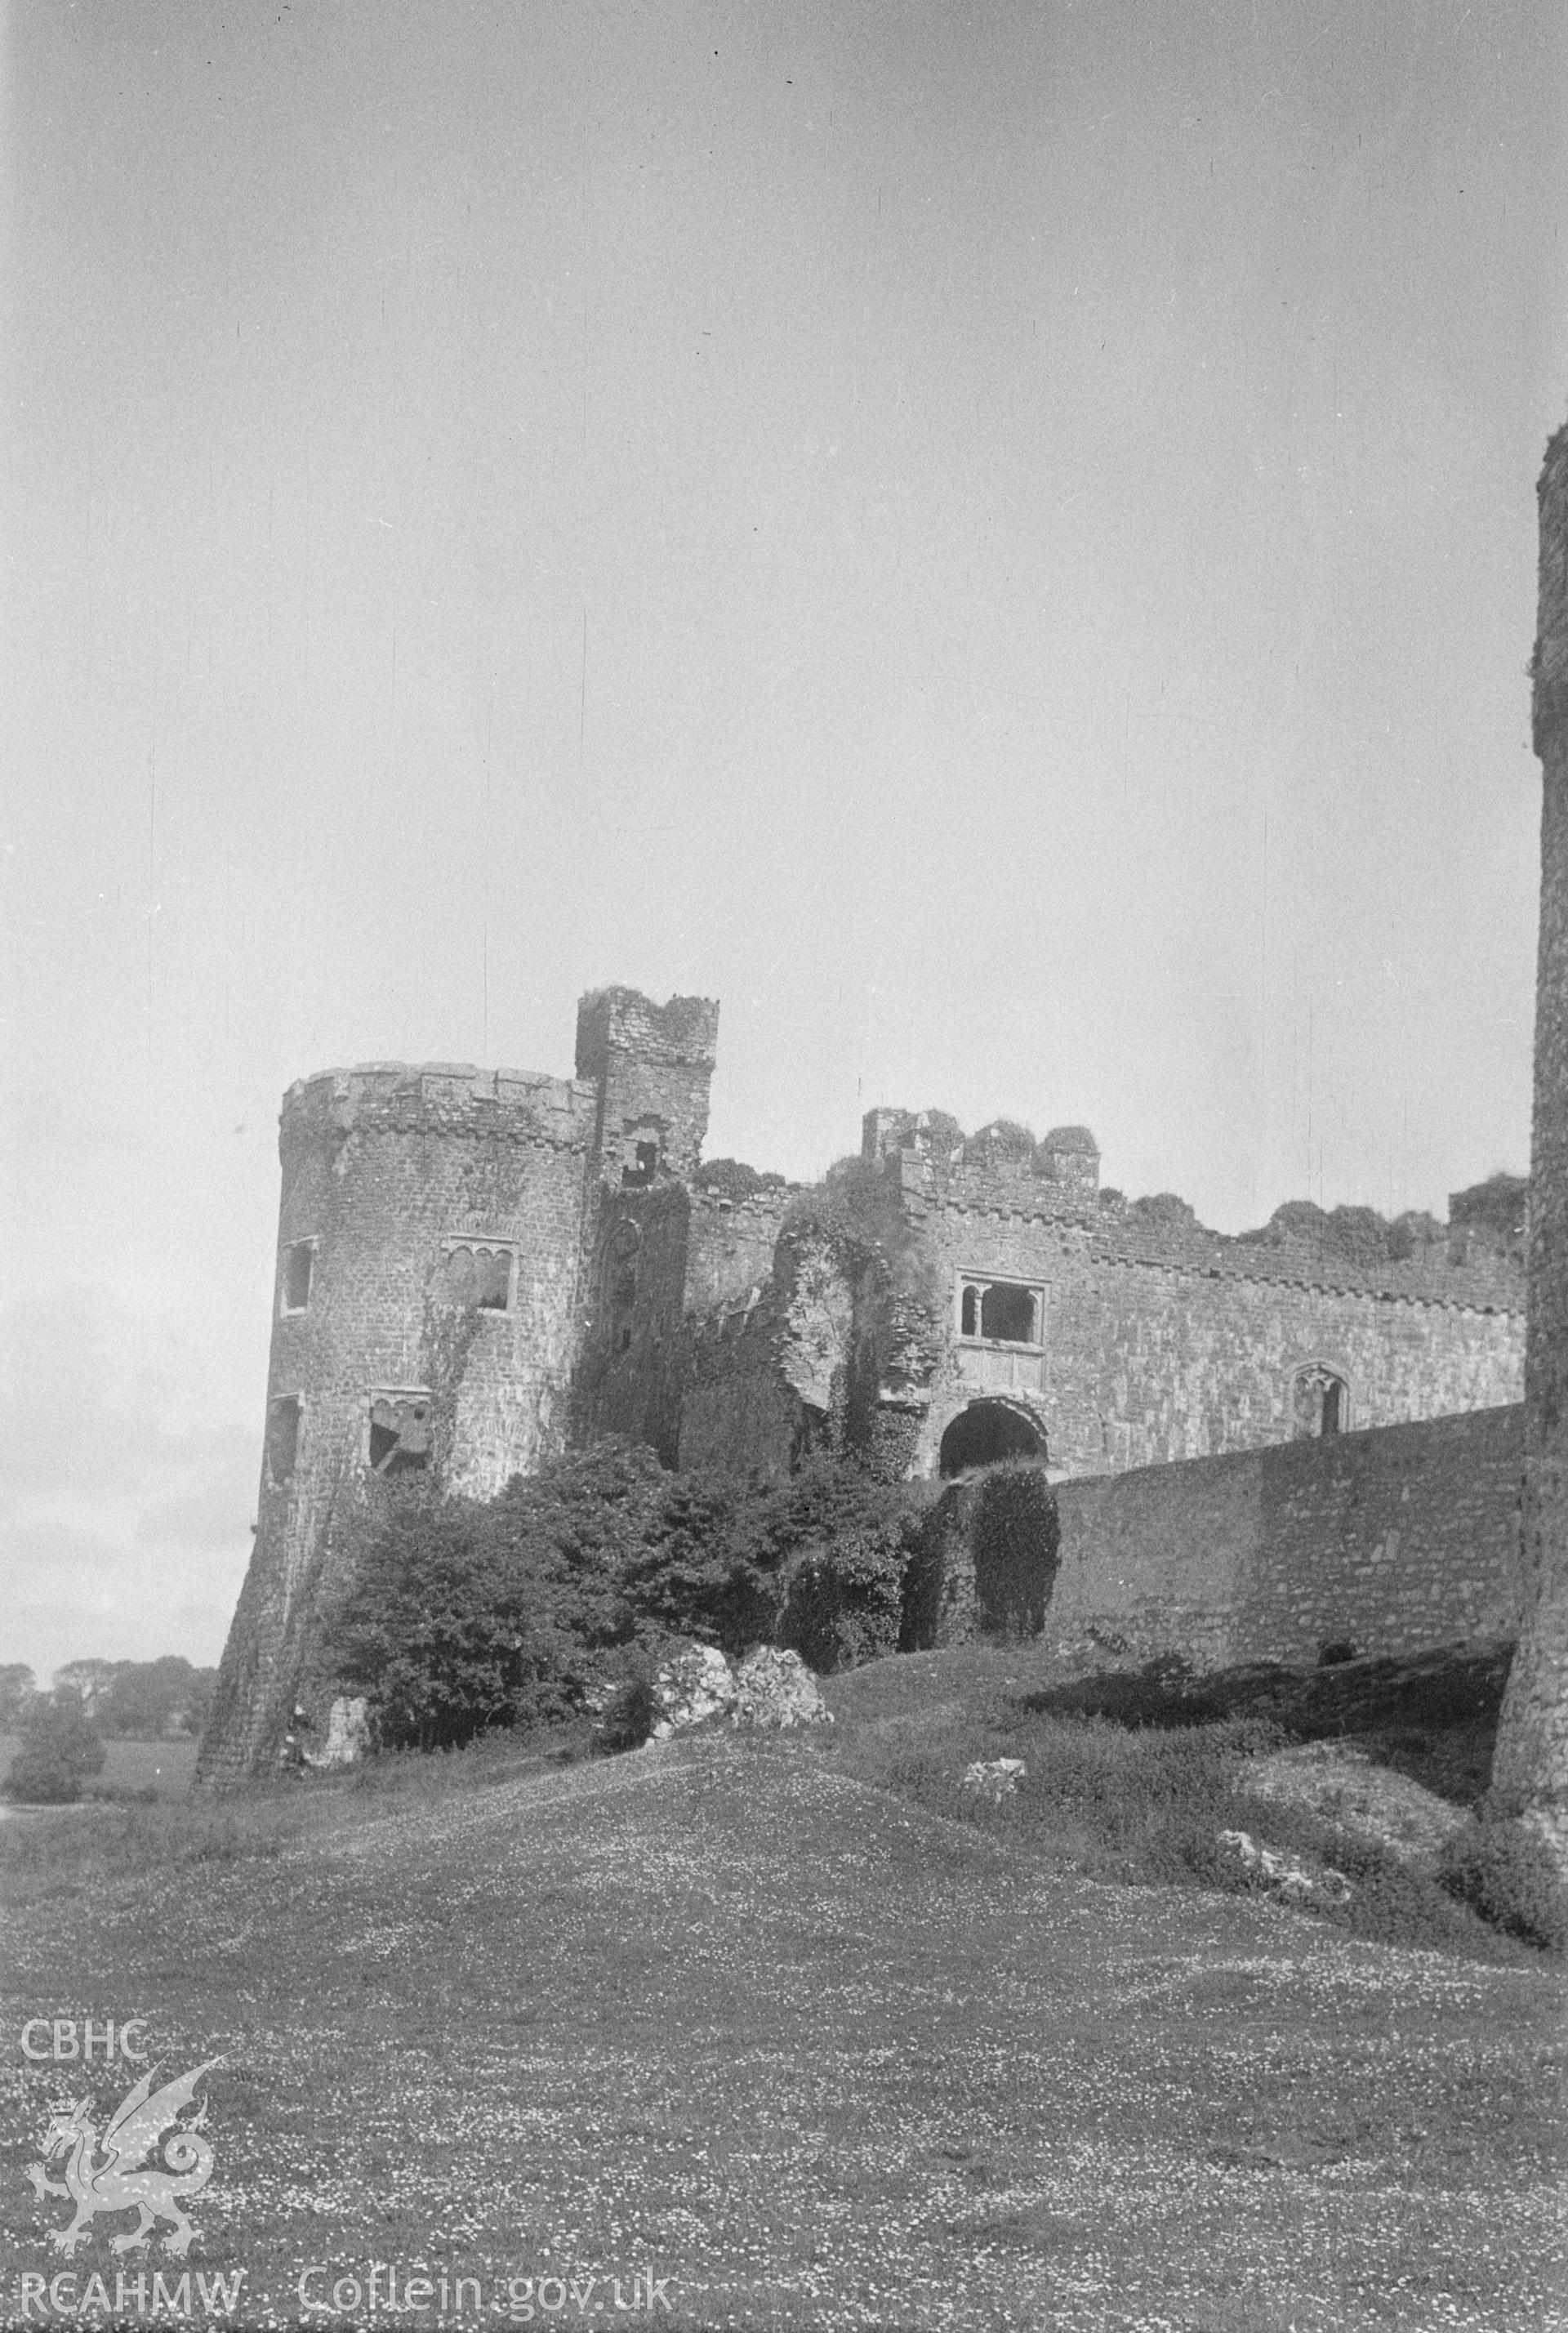 Black and white nitrate negative showing exterior view of Carew Castle.